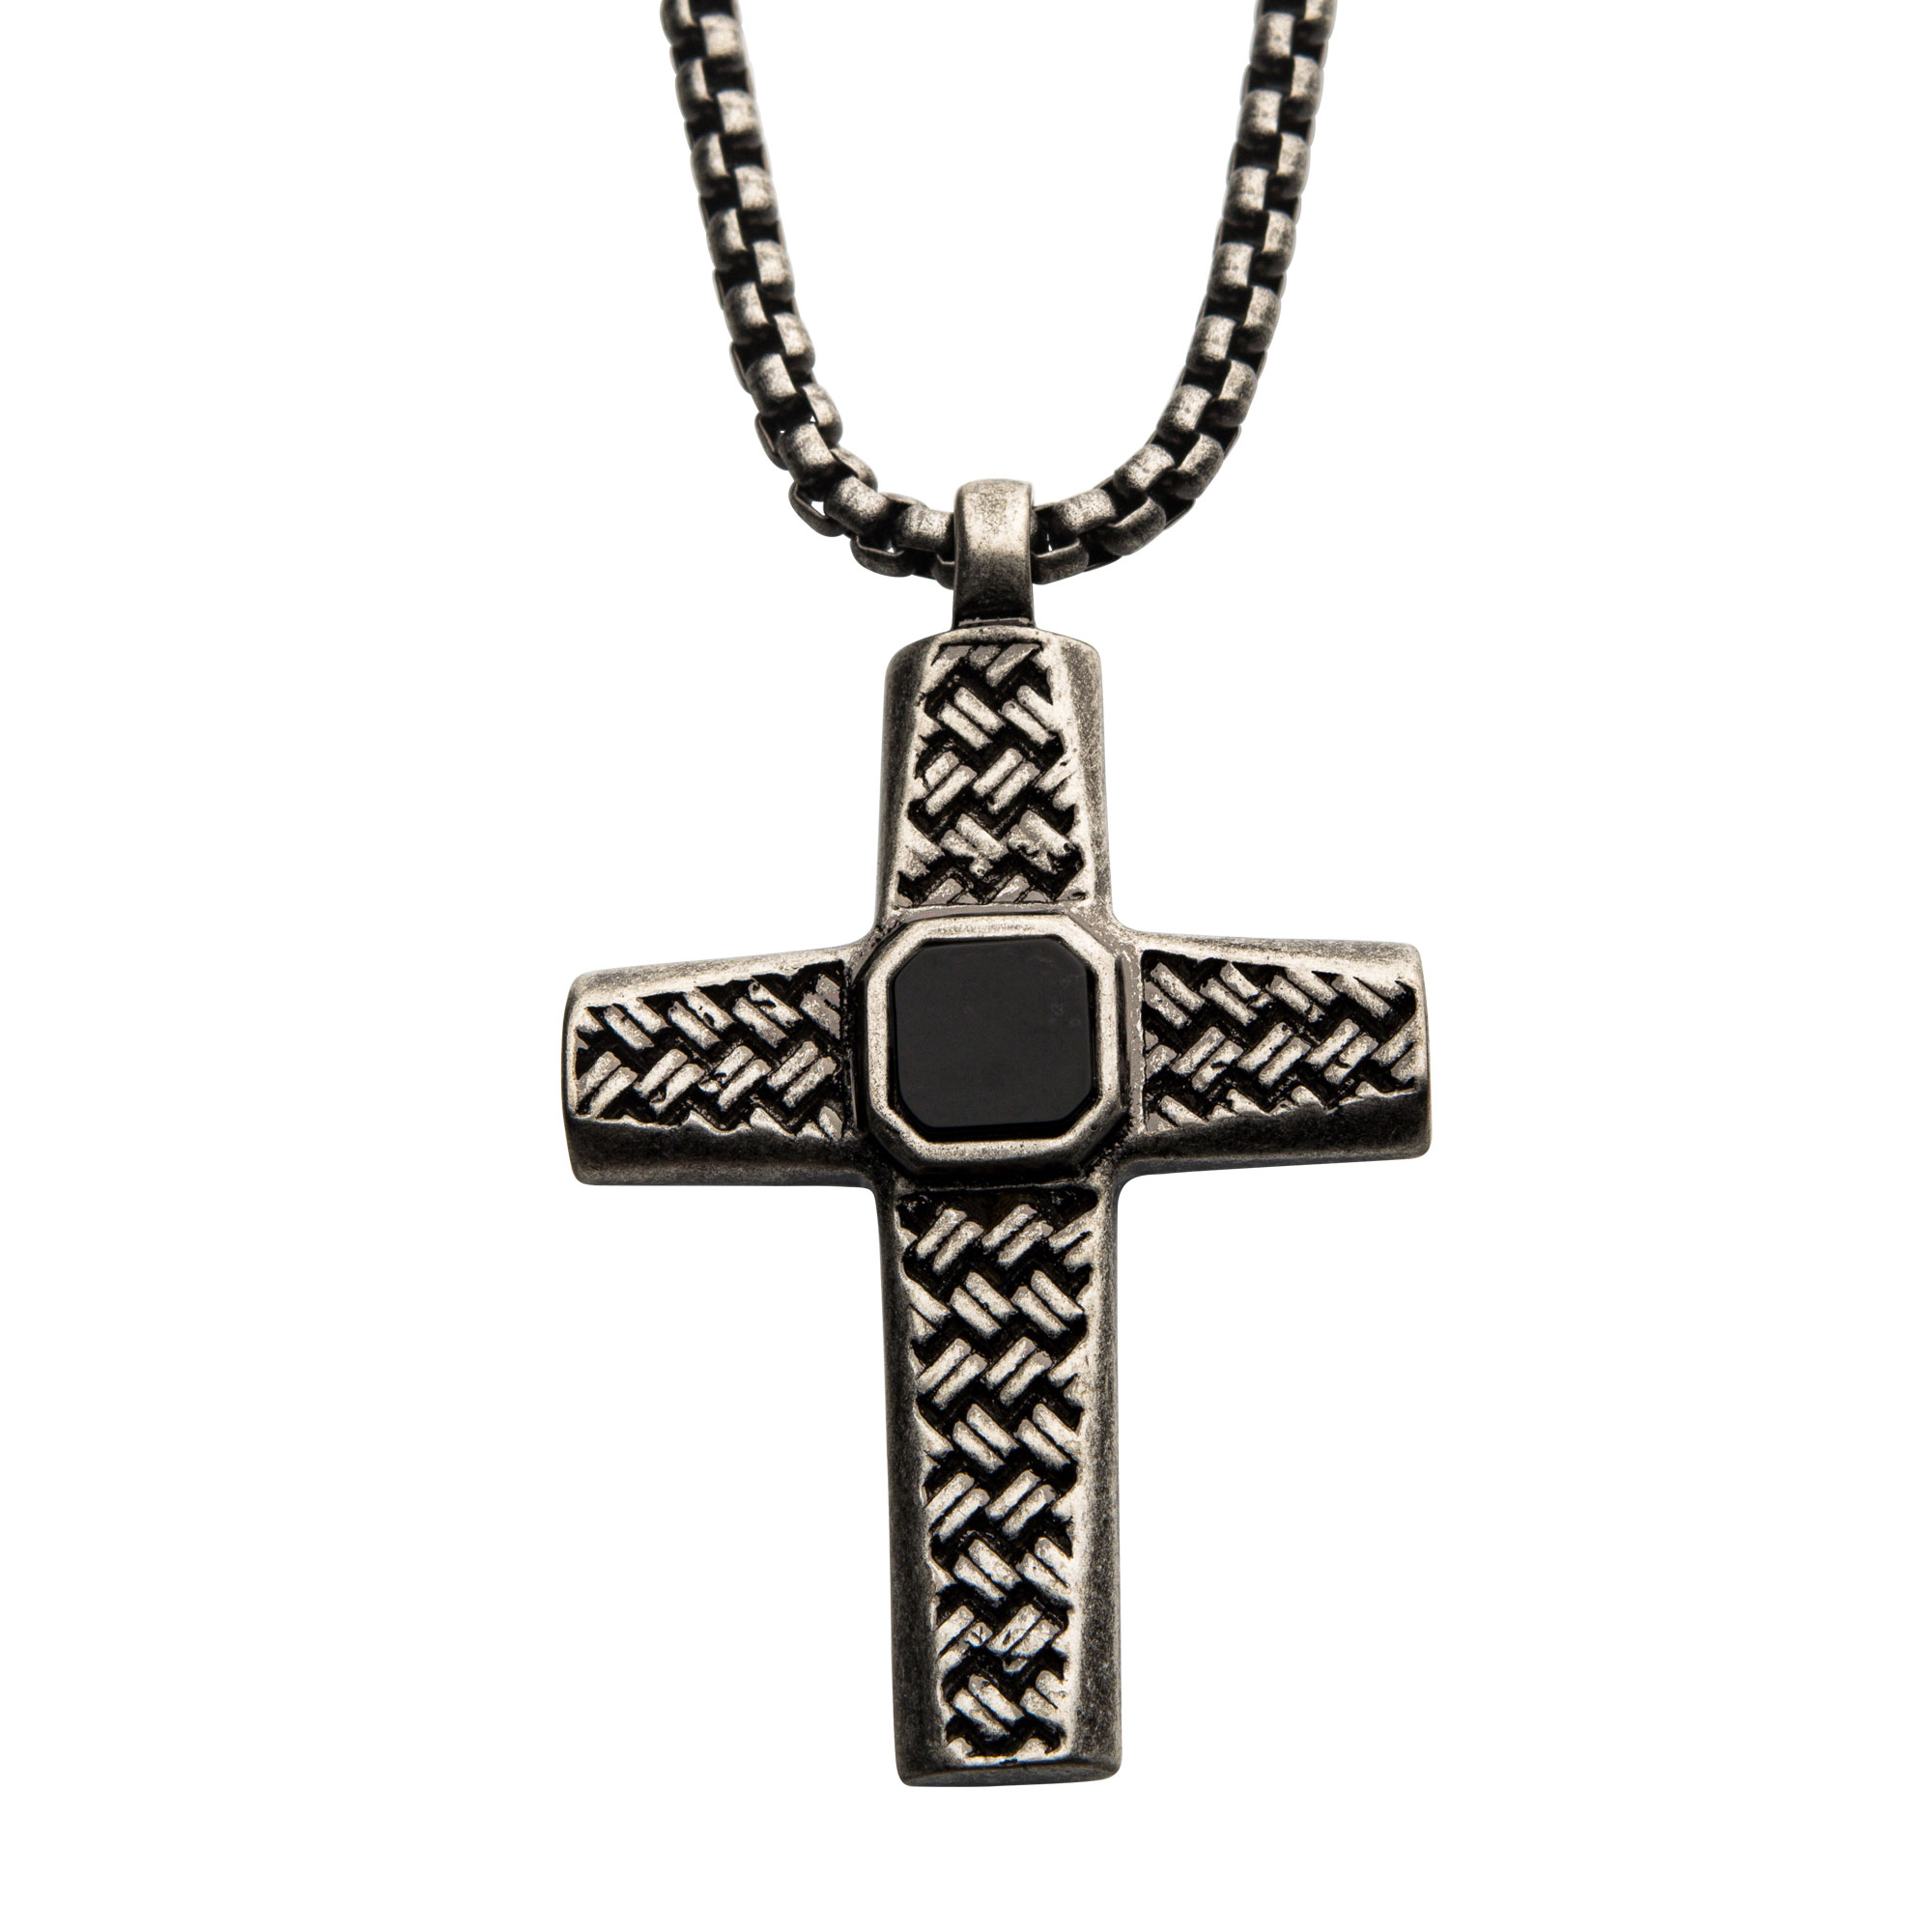 Stainless Steel Silver Plated Cross Pendant with Black Agate Stone, with Steel Box Chain Carroll / Ochs Jewelers Monroe, MI